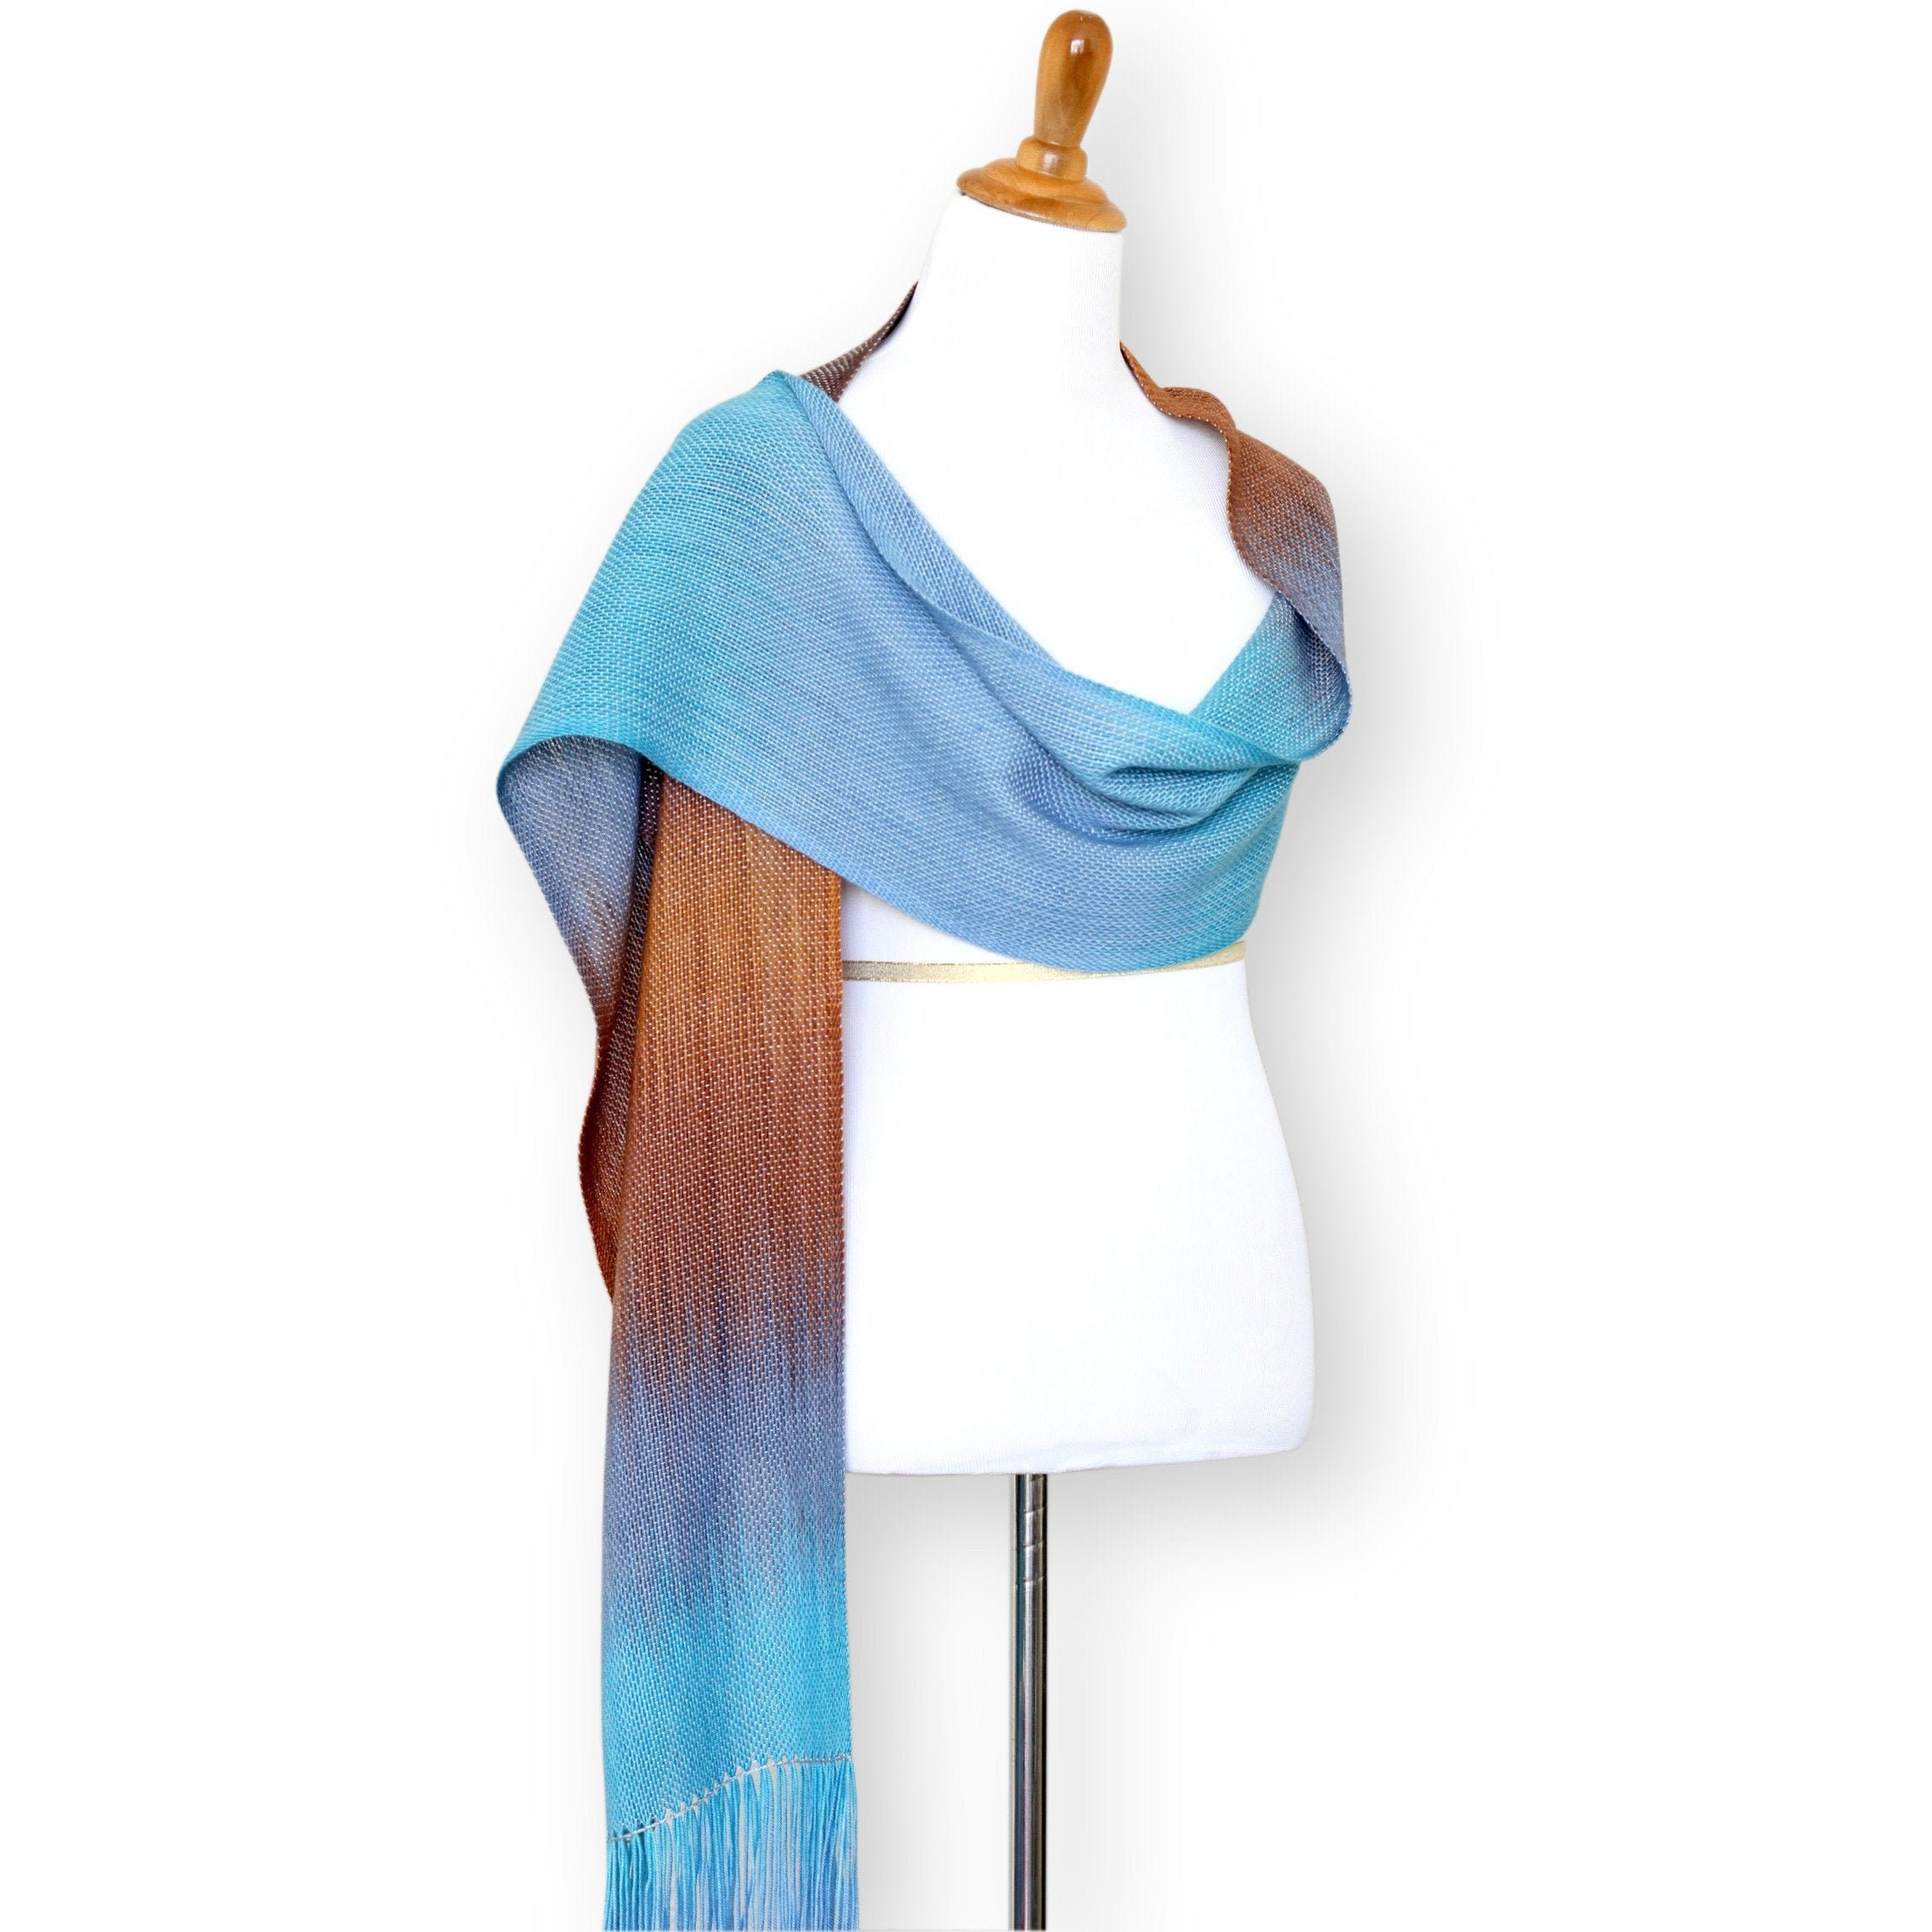 katerynaG Hand Woven Scarf, Pashmina Scarf, Women Wrap, Gradient Color Turquoise, Blue and Brown Long with Fringe Gift for Her